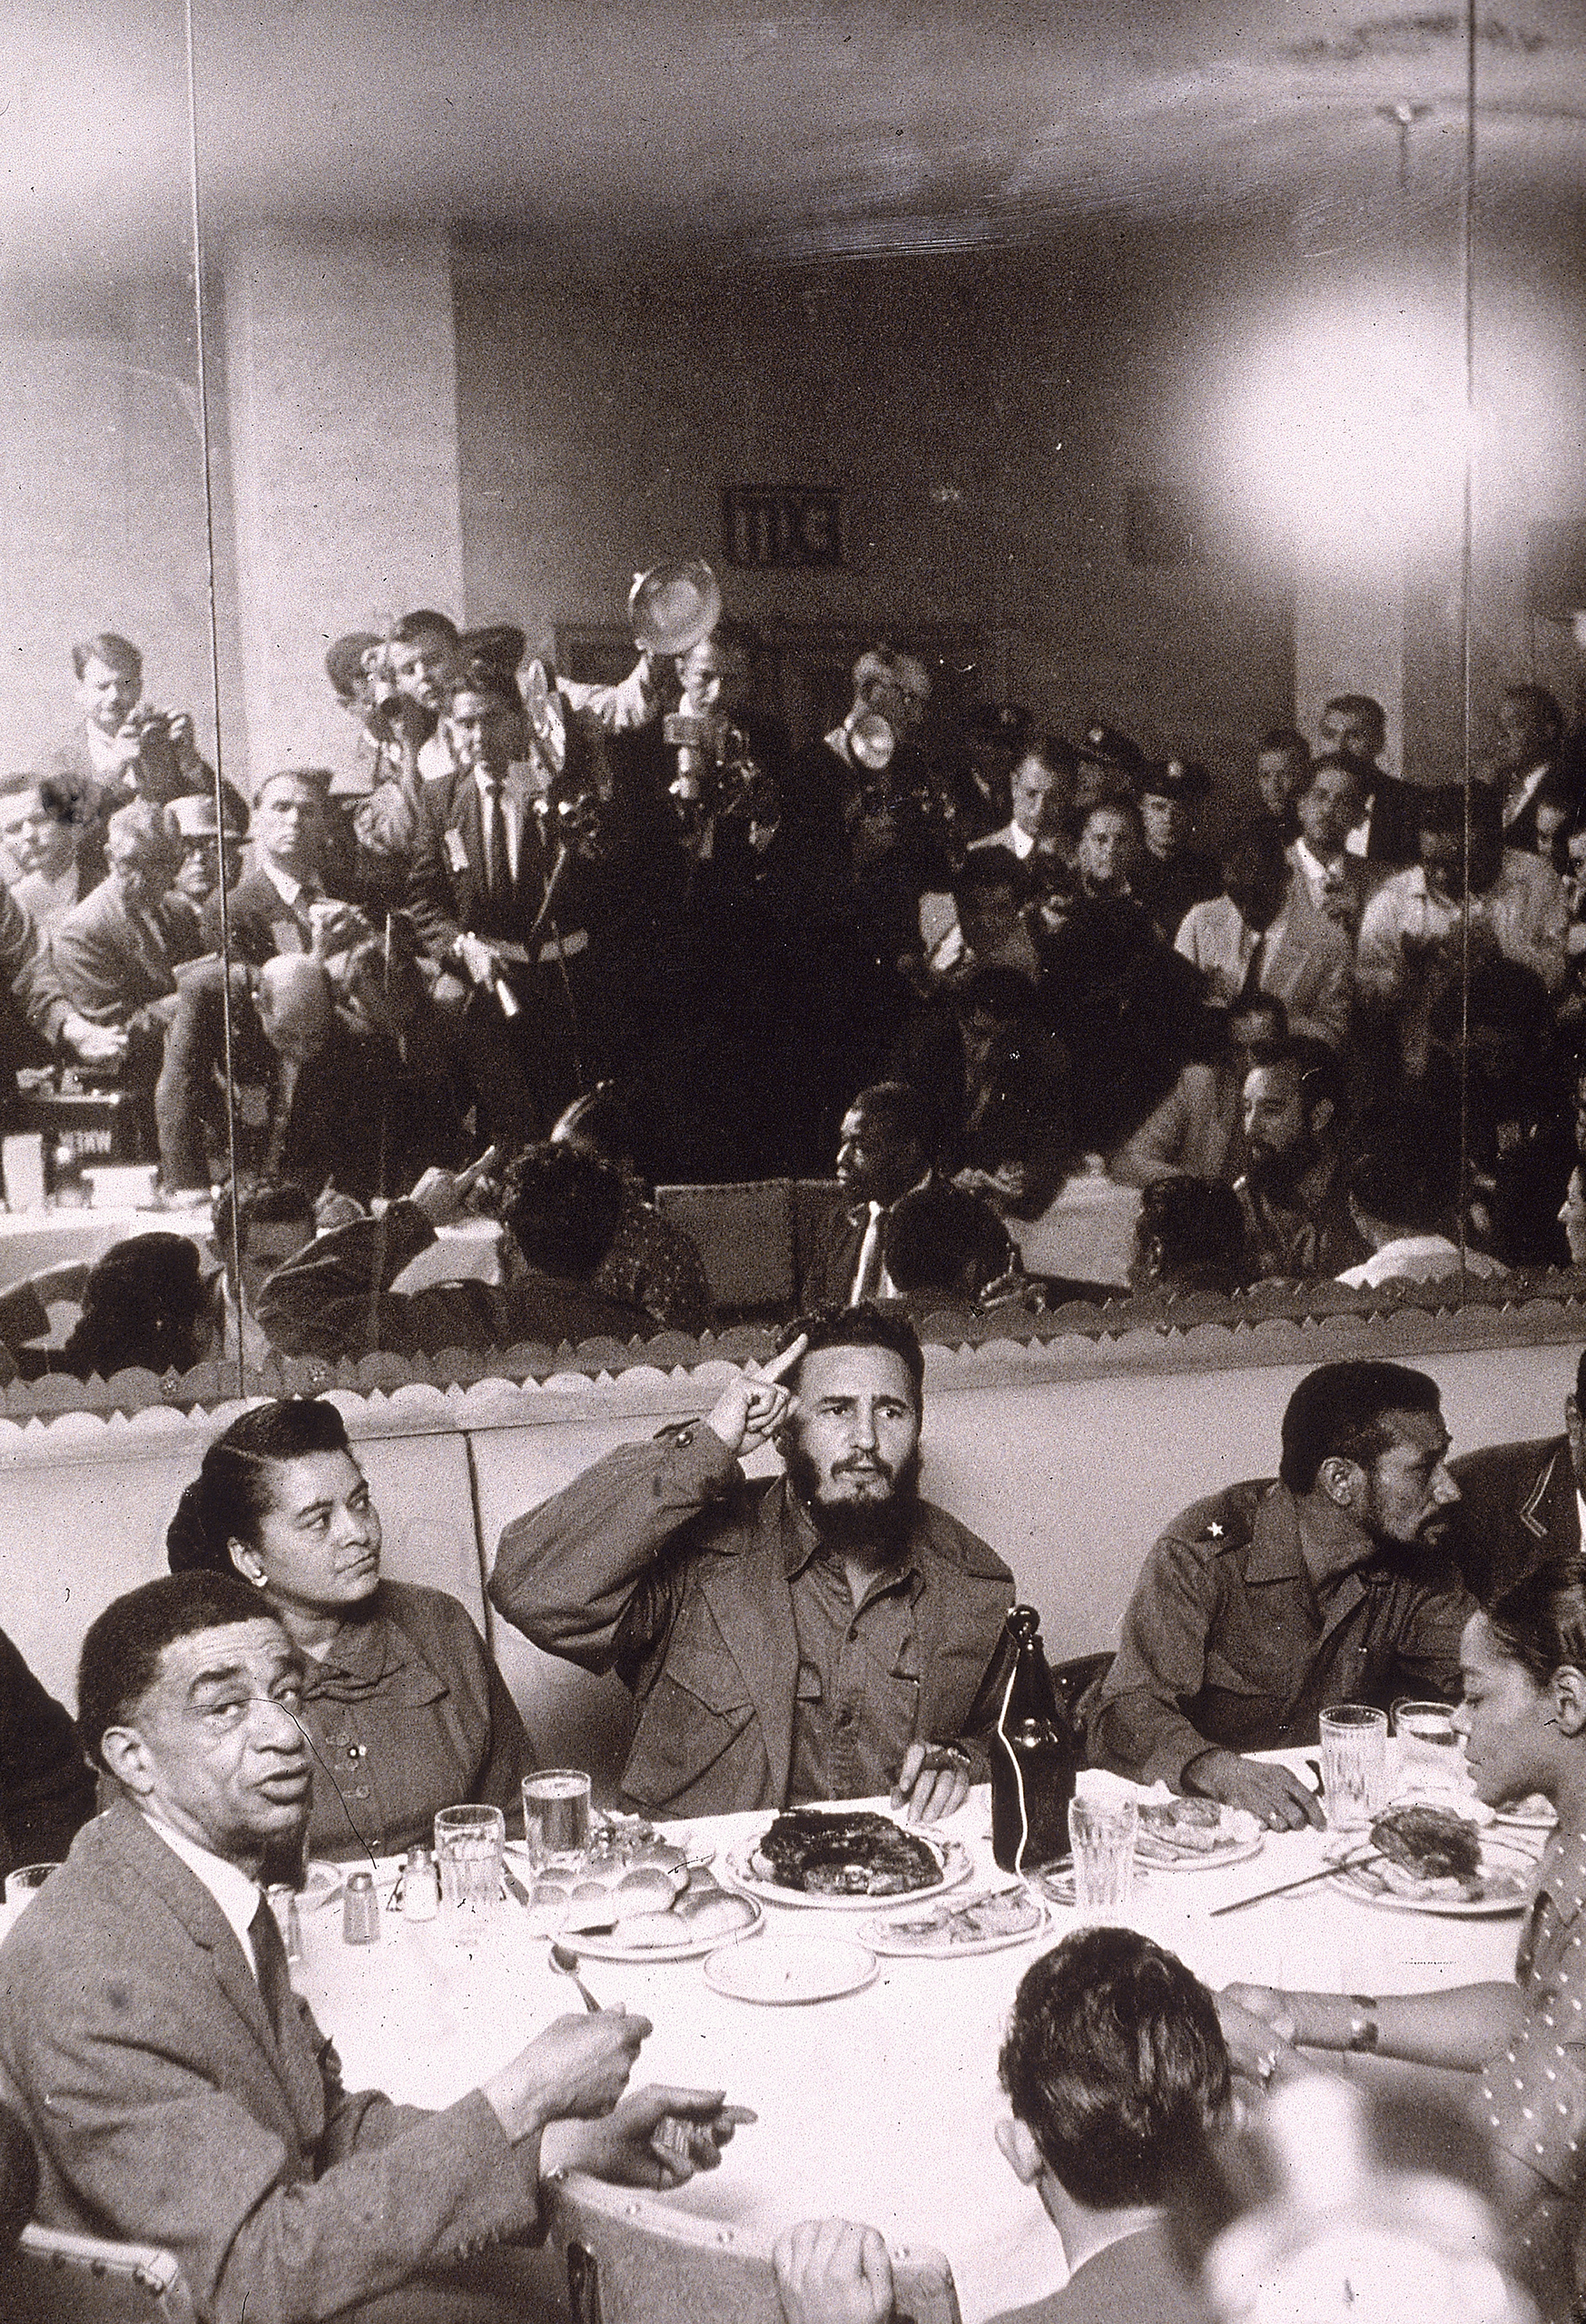 Cuban President Fidel Castro entertains a group of people at a dinner table in Harlem during a trip to New York City, as the press takes photographs in the background, 1959.